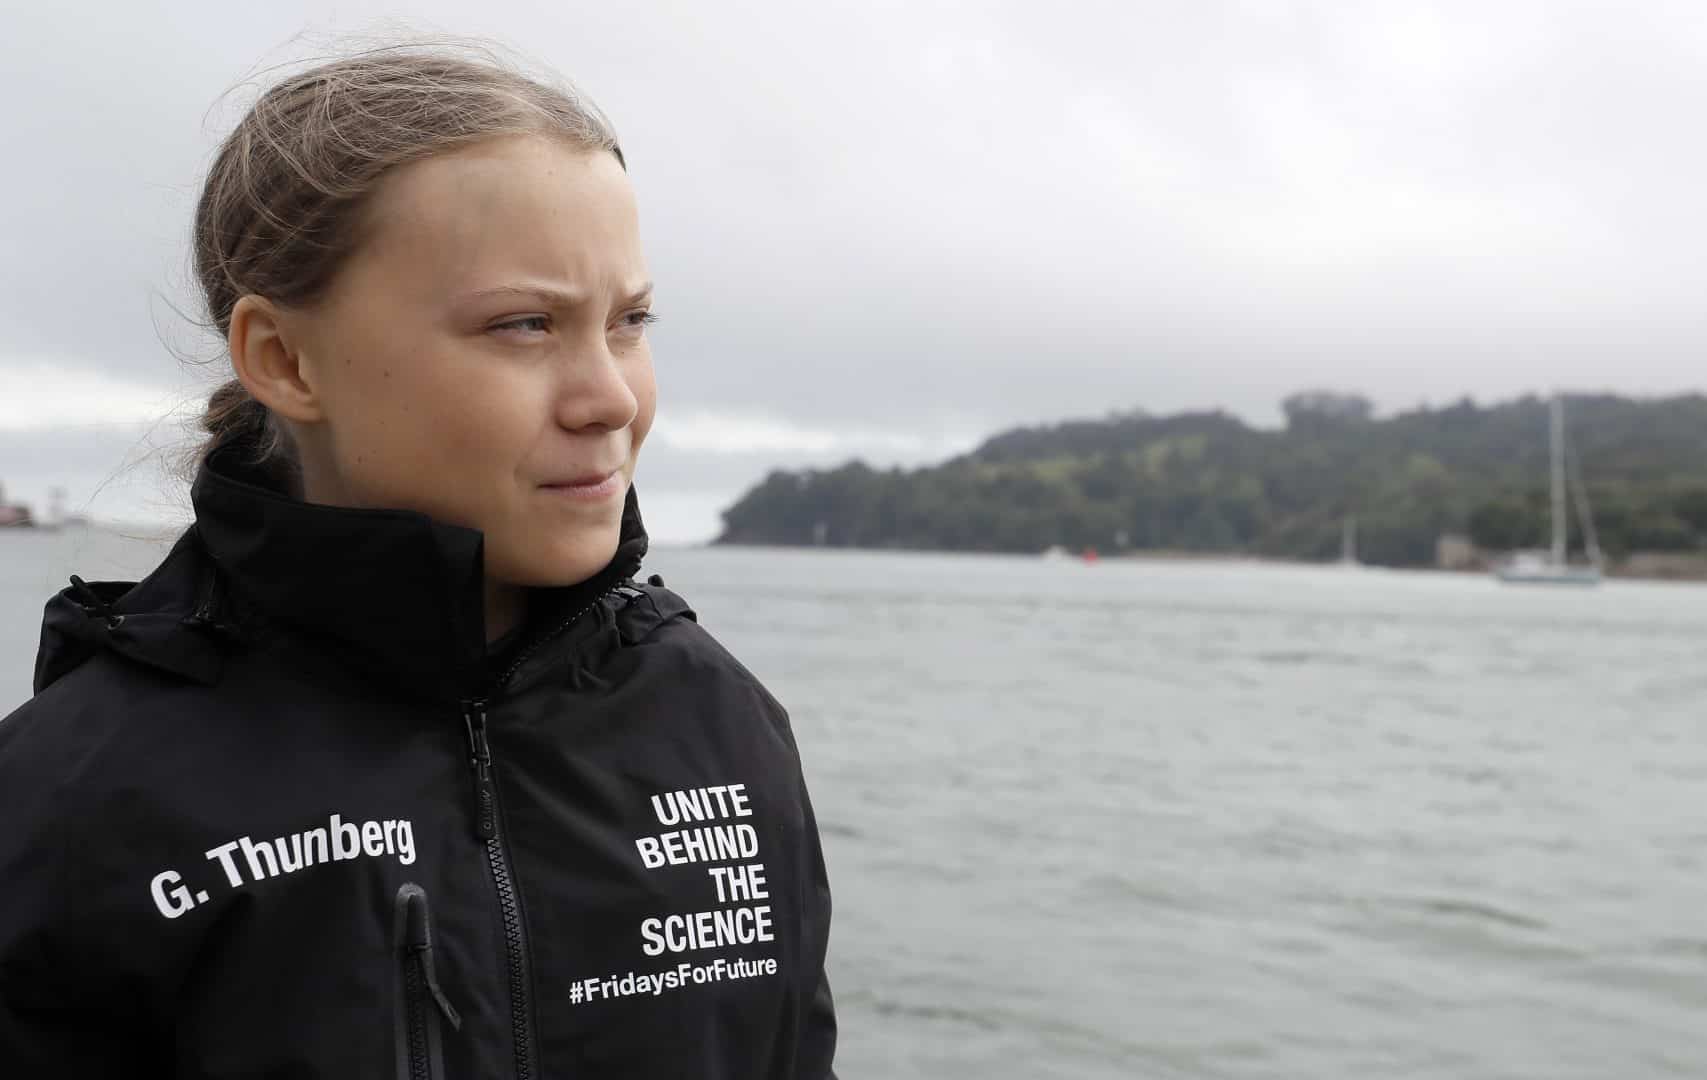 Greta Thunberg guest-edits BBC’s Today, as officials warn 2020 the last chance to make a difference